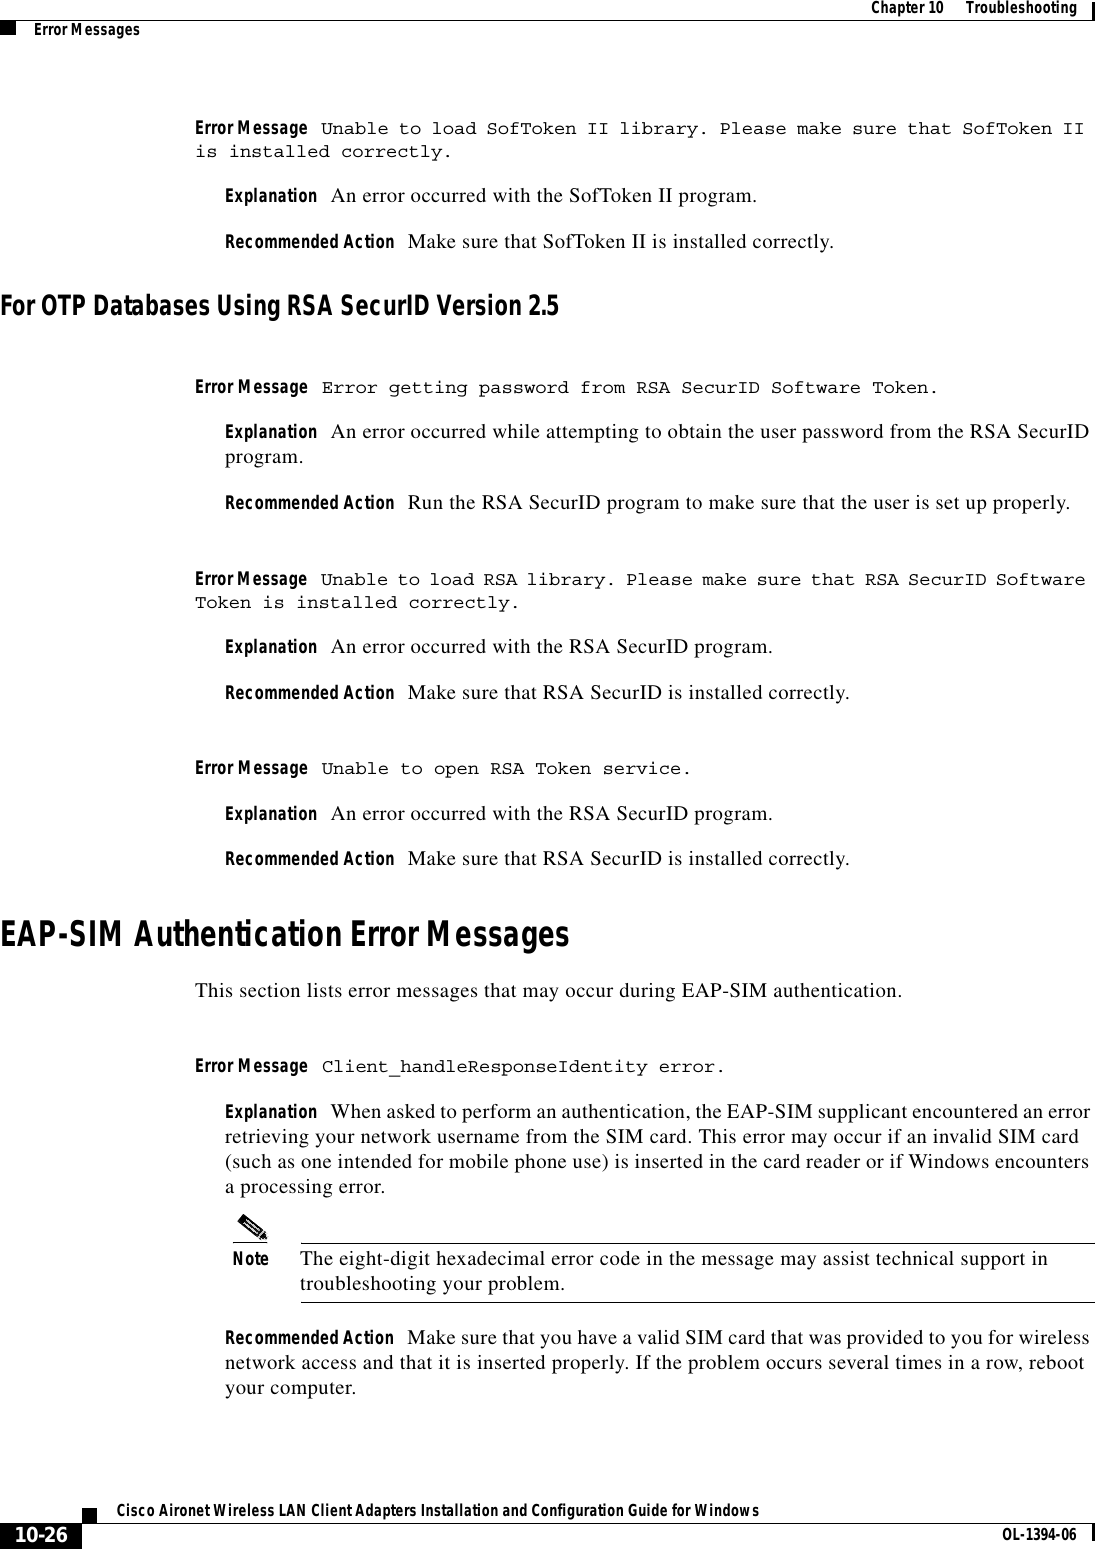 10-26Cisco Aironet Wireless LAN Client Adapters Installation and Configuration Guide for Windows OL-1394-06Chapter 10      TroubleshootingError MessagesError Message Unable to load SofToken II library. Please make sure that SofToken II is installed correctly.Explanation An error occurred with the SofToken II program.Recommended Action Make sure that SofToken II is installed correctly.For OTP Databases Using RSA SecurID Version 2.5Error Message Error getting password from RSA SecurID Software Token.Explanation An error occurred while attempting to obtain the user password from the RSA SecurID program.Recommended Action Run the RSA SecurID program to make sure that the user is set up properly.Error Message Unable to load RSA library. Please make sure that RSA SecurID Software Token is installed correctly.Explanation An error occurred with the RSA SecurID program.Recommended Action Make sure that RSA SecurID is installed correctly.Error Message Unable to open RSA Token service.Explanation An error occurred with the RSA SecurID program.Recommended Action Make sure that RSA SecurID is installed correctly.EAP-SIM Authentication Error MessagesThis section lists error messages that may occur during EAP-SIM authentication.Error Message Client_handleResponseIdentity error.Explanation When asked to perform an authentication, the EAP-SIM supplicant encountered an error retrieving your network username from the SIM card. This error may occur if an invalid SIM card (such as one intended for mobile phone use) is inserted in the card reader or if Windows encounters a processing error.Note The eight-digit hexadecimal error code in the message may assist technical support in troubleshooting your problem.Recommended Action Make sure that you have a valid SIM card that was provided to you for wireless network access and that it is inserted properly. If the problem occurs several times in a row, reboot your computer.